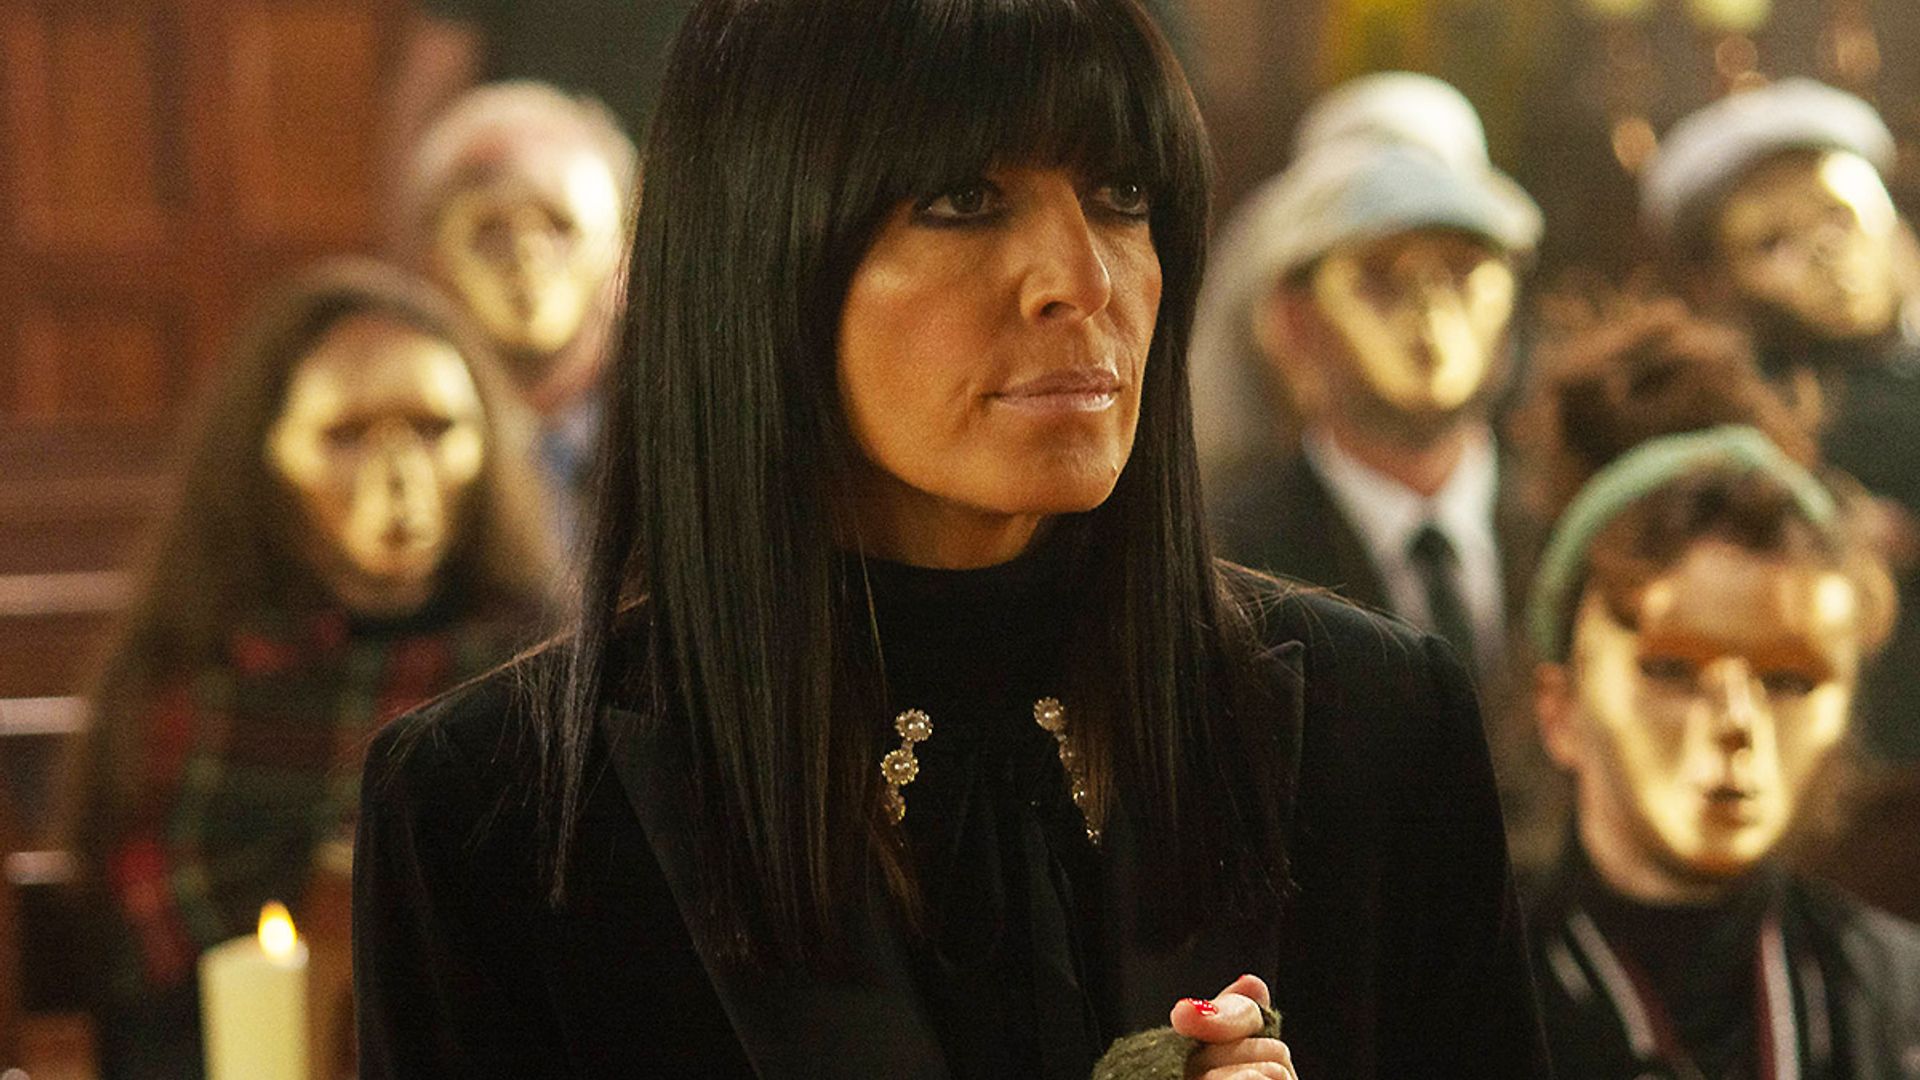 Claudia Winkleman wears surprising Marks & Spencer blazer on The Traitors - see photo